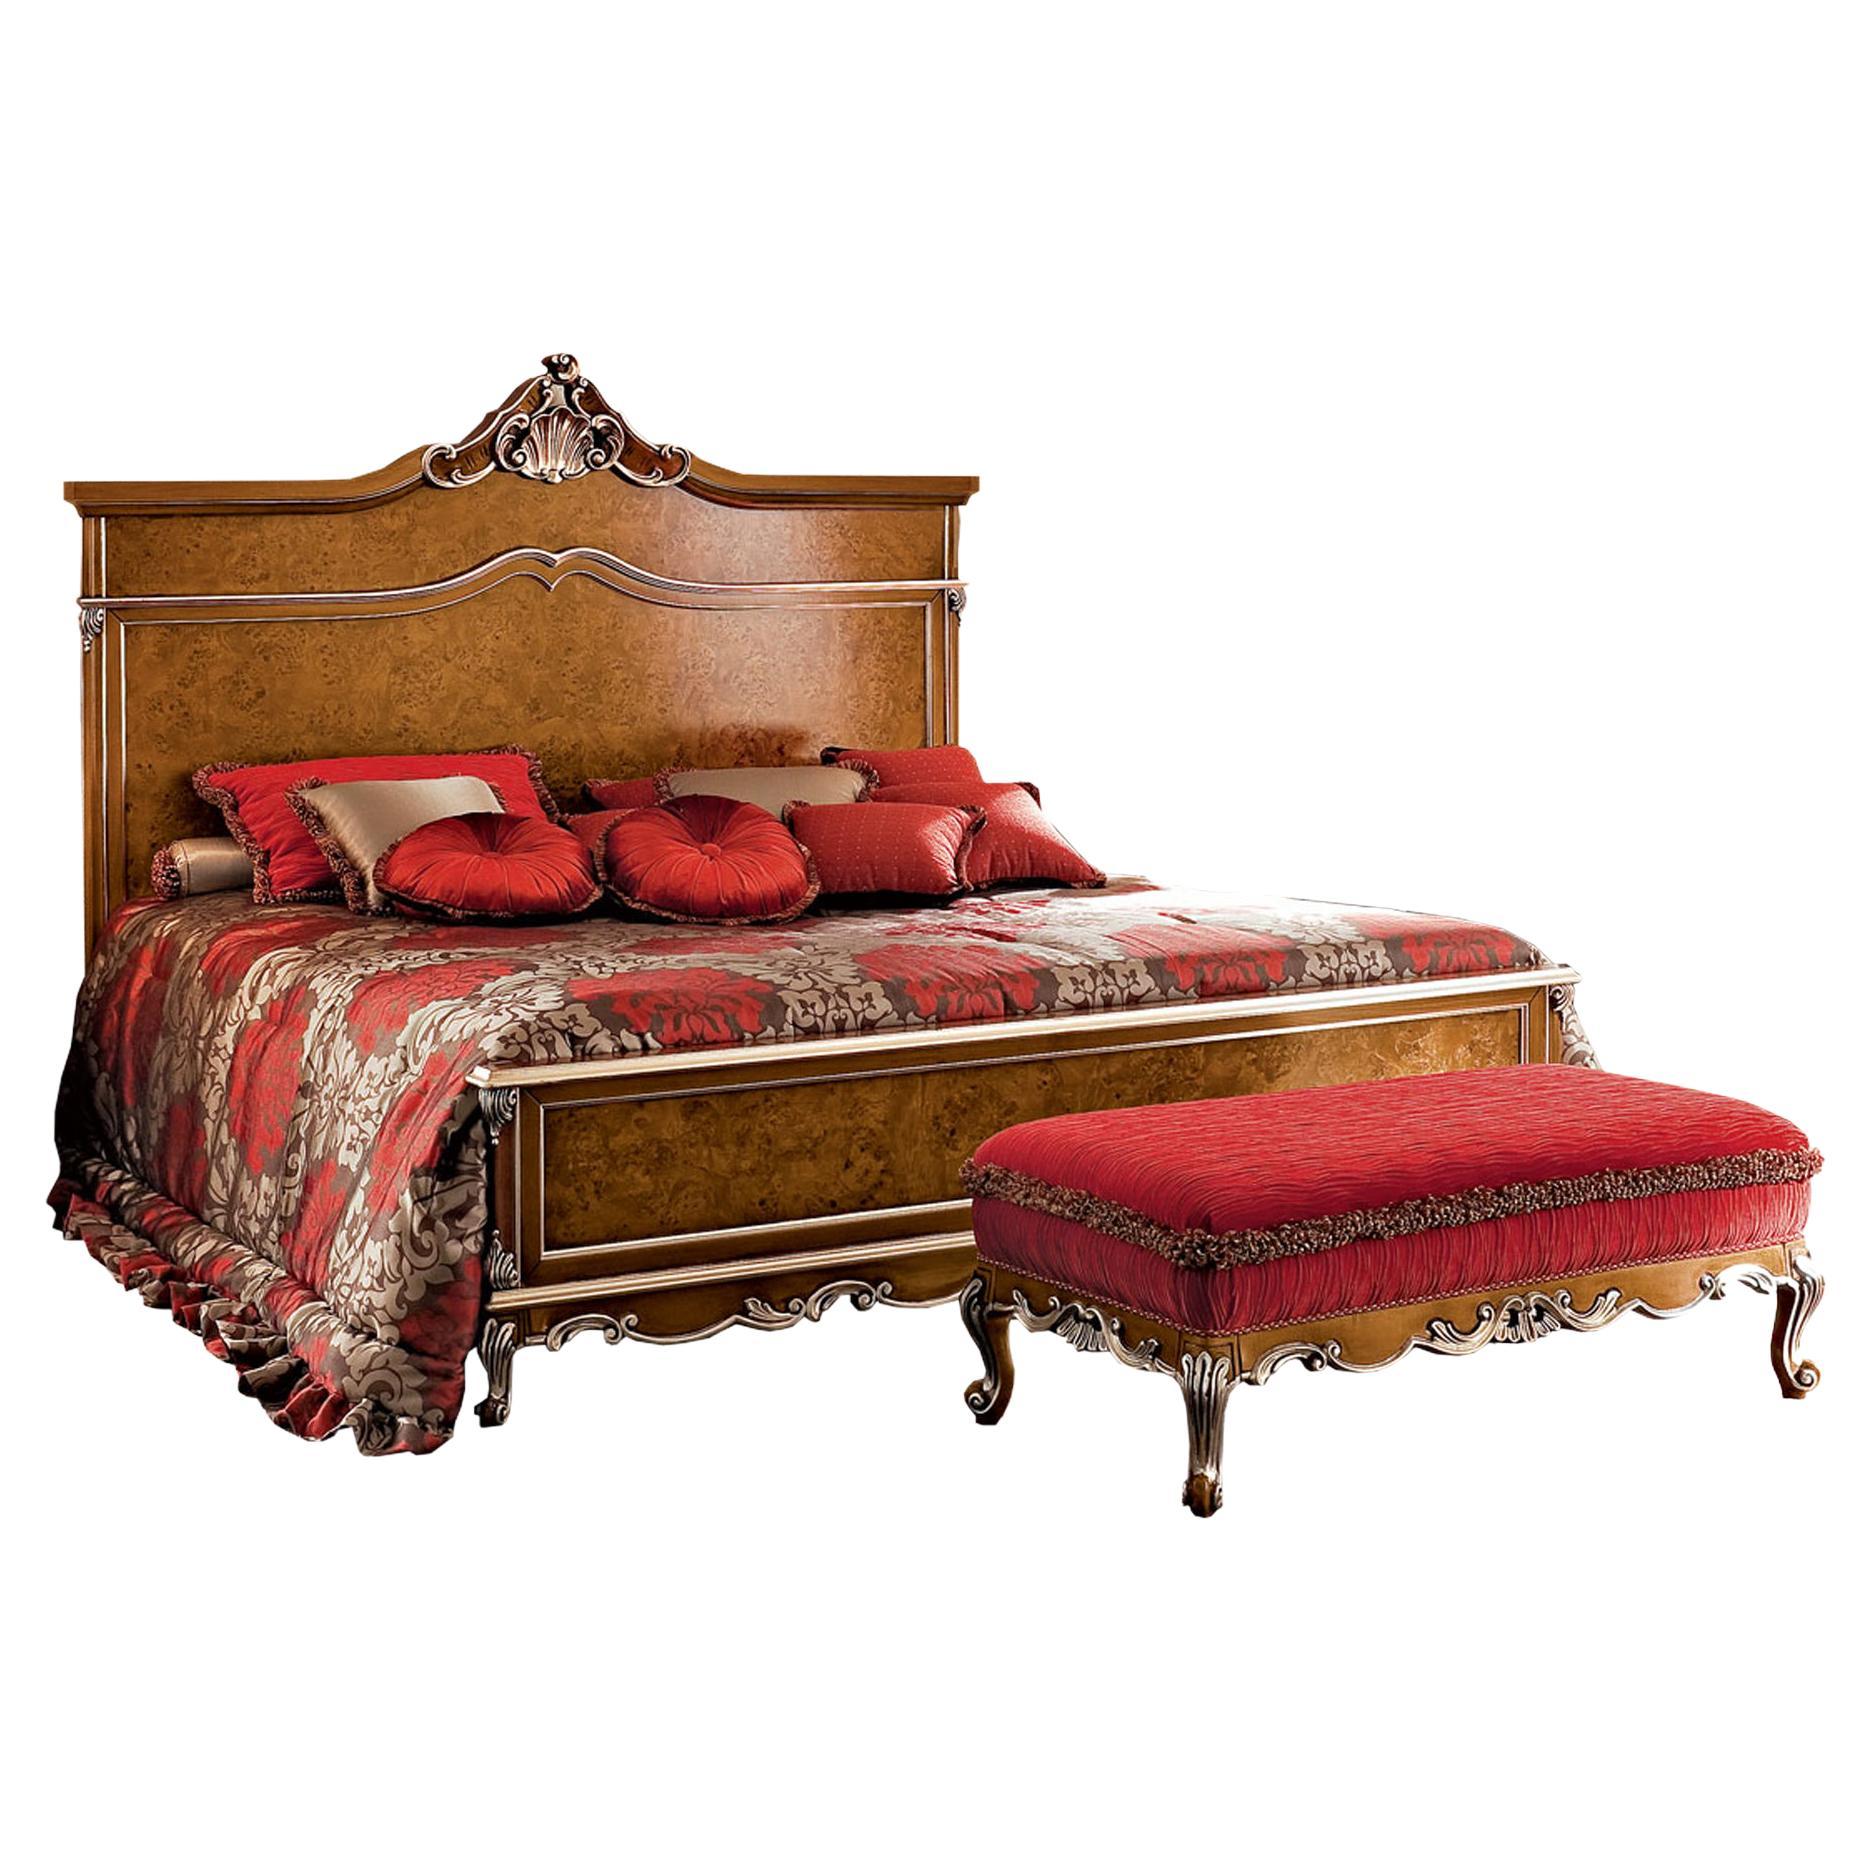 21st Century Handcarved Radica Double Bed by Modenese Gastone Interiors